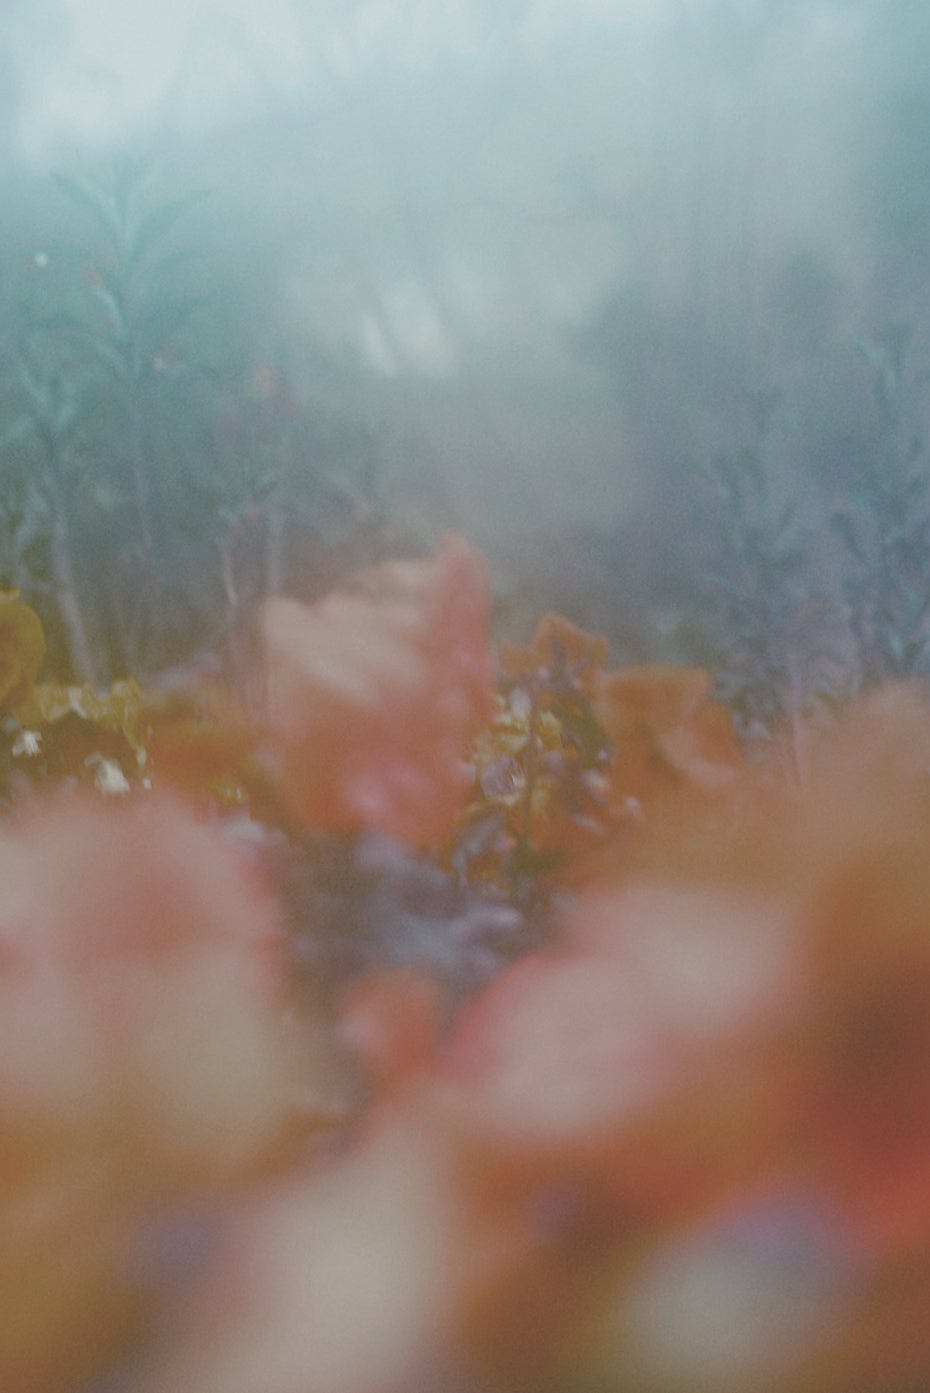 Photography by Jordan Sullivan titled "The Autumns of Spring 12".